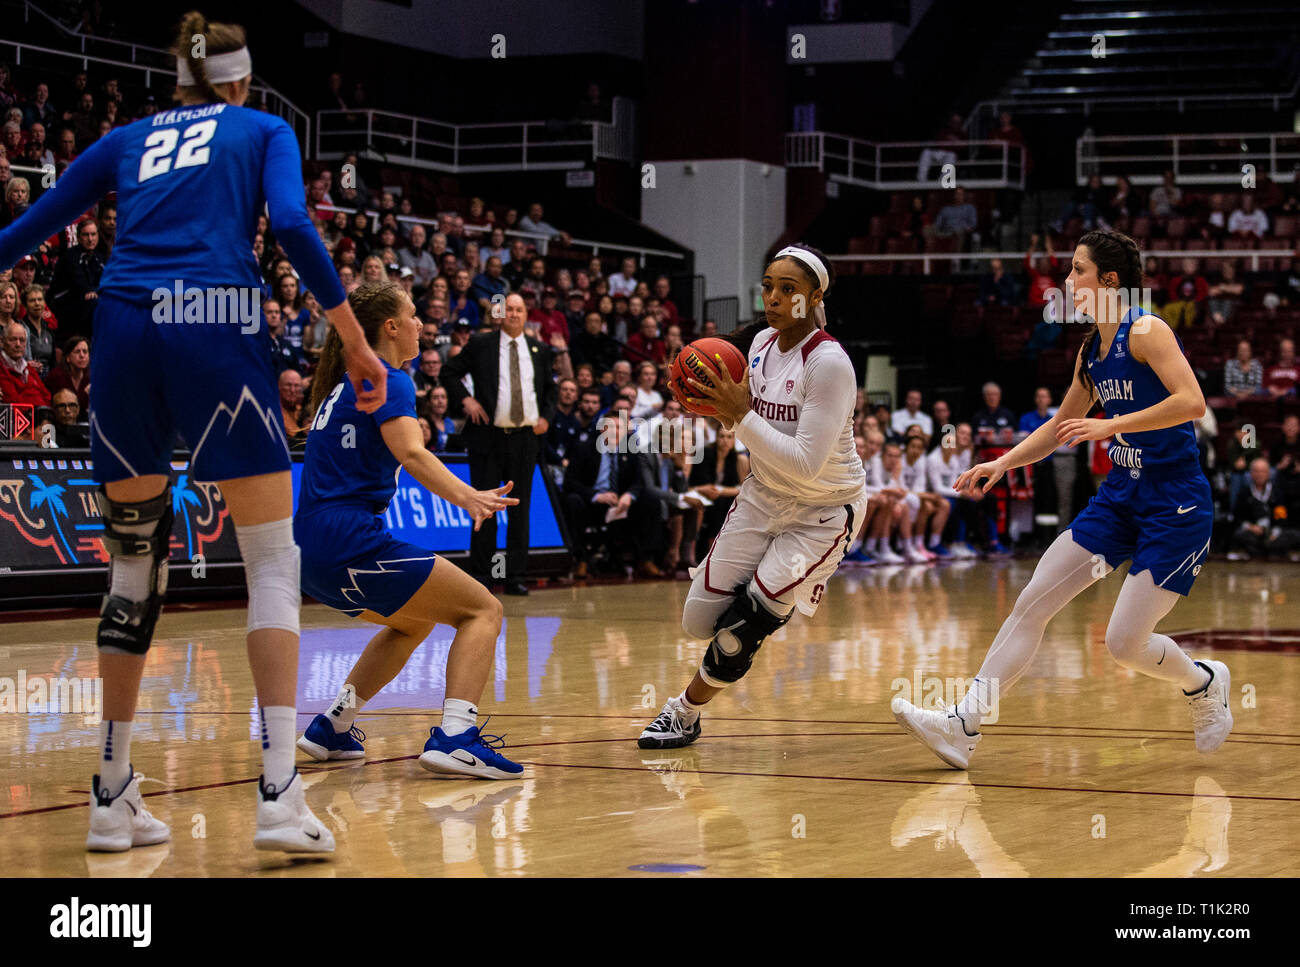 Stanford, CA, USA. 25th Mar, 2019. A. Stanford guard DiJonai Carrington (21)drives to the basket during the NCAA Women's Basketball Championship Second Round between the BYU Cougars and the Stanford Cardinal 72-63 win at Maples Pavilion Stanford, CA. Thurman James /CSM/Alamy Live News Stock Photo